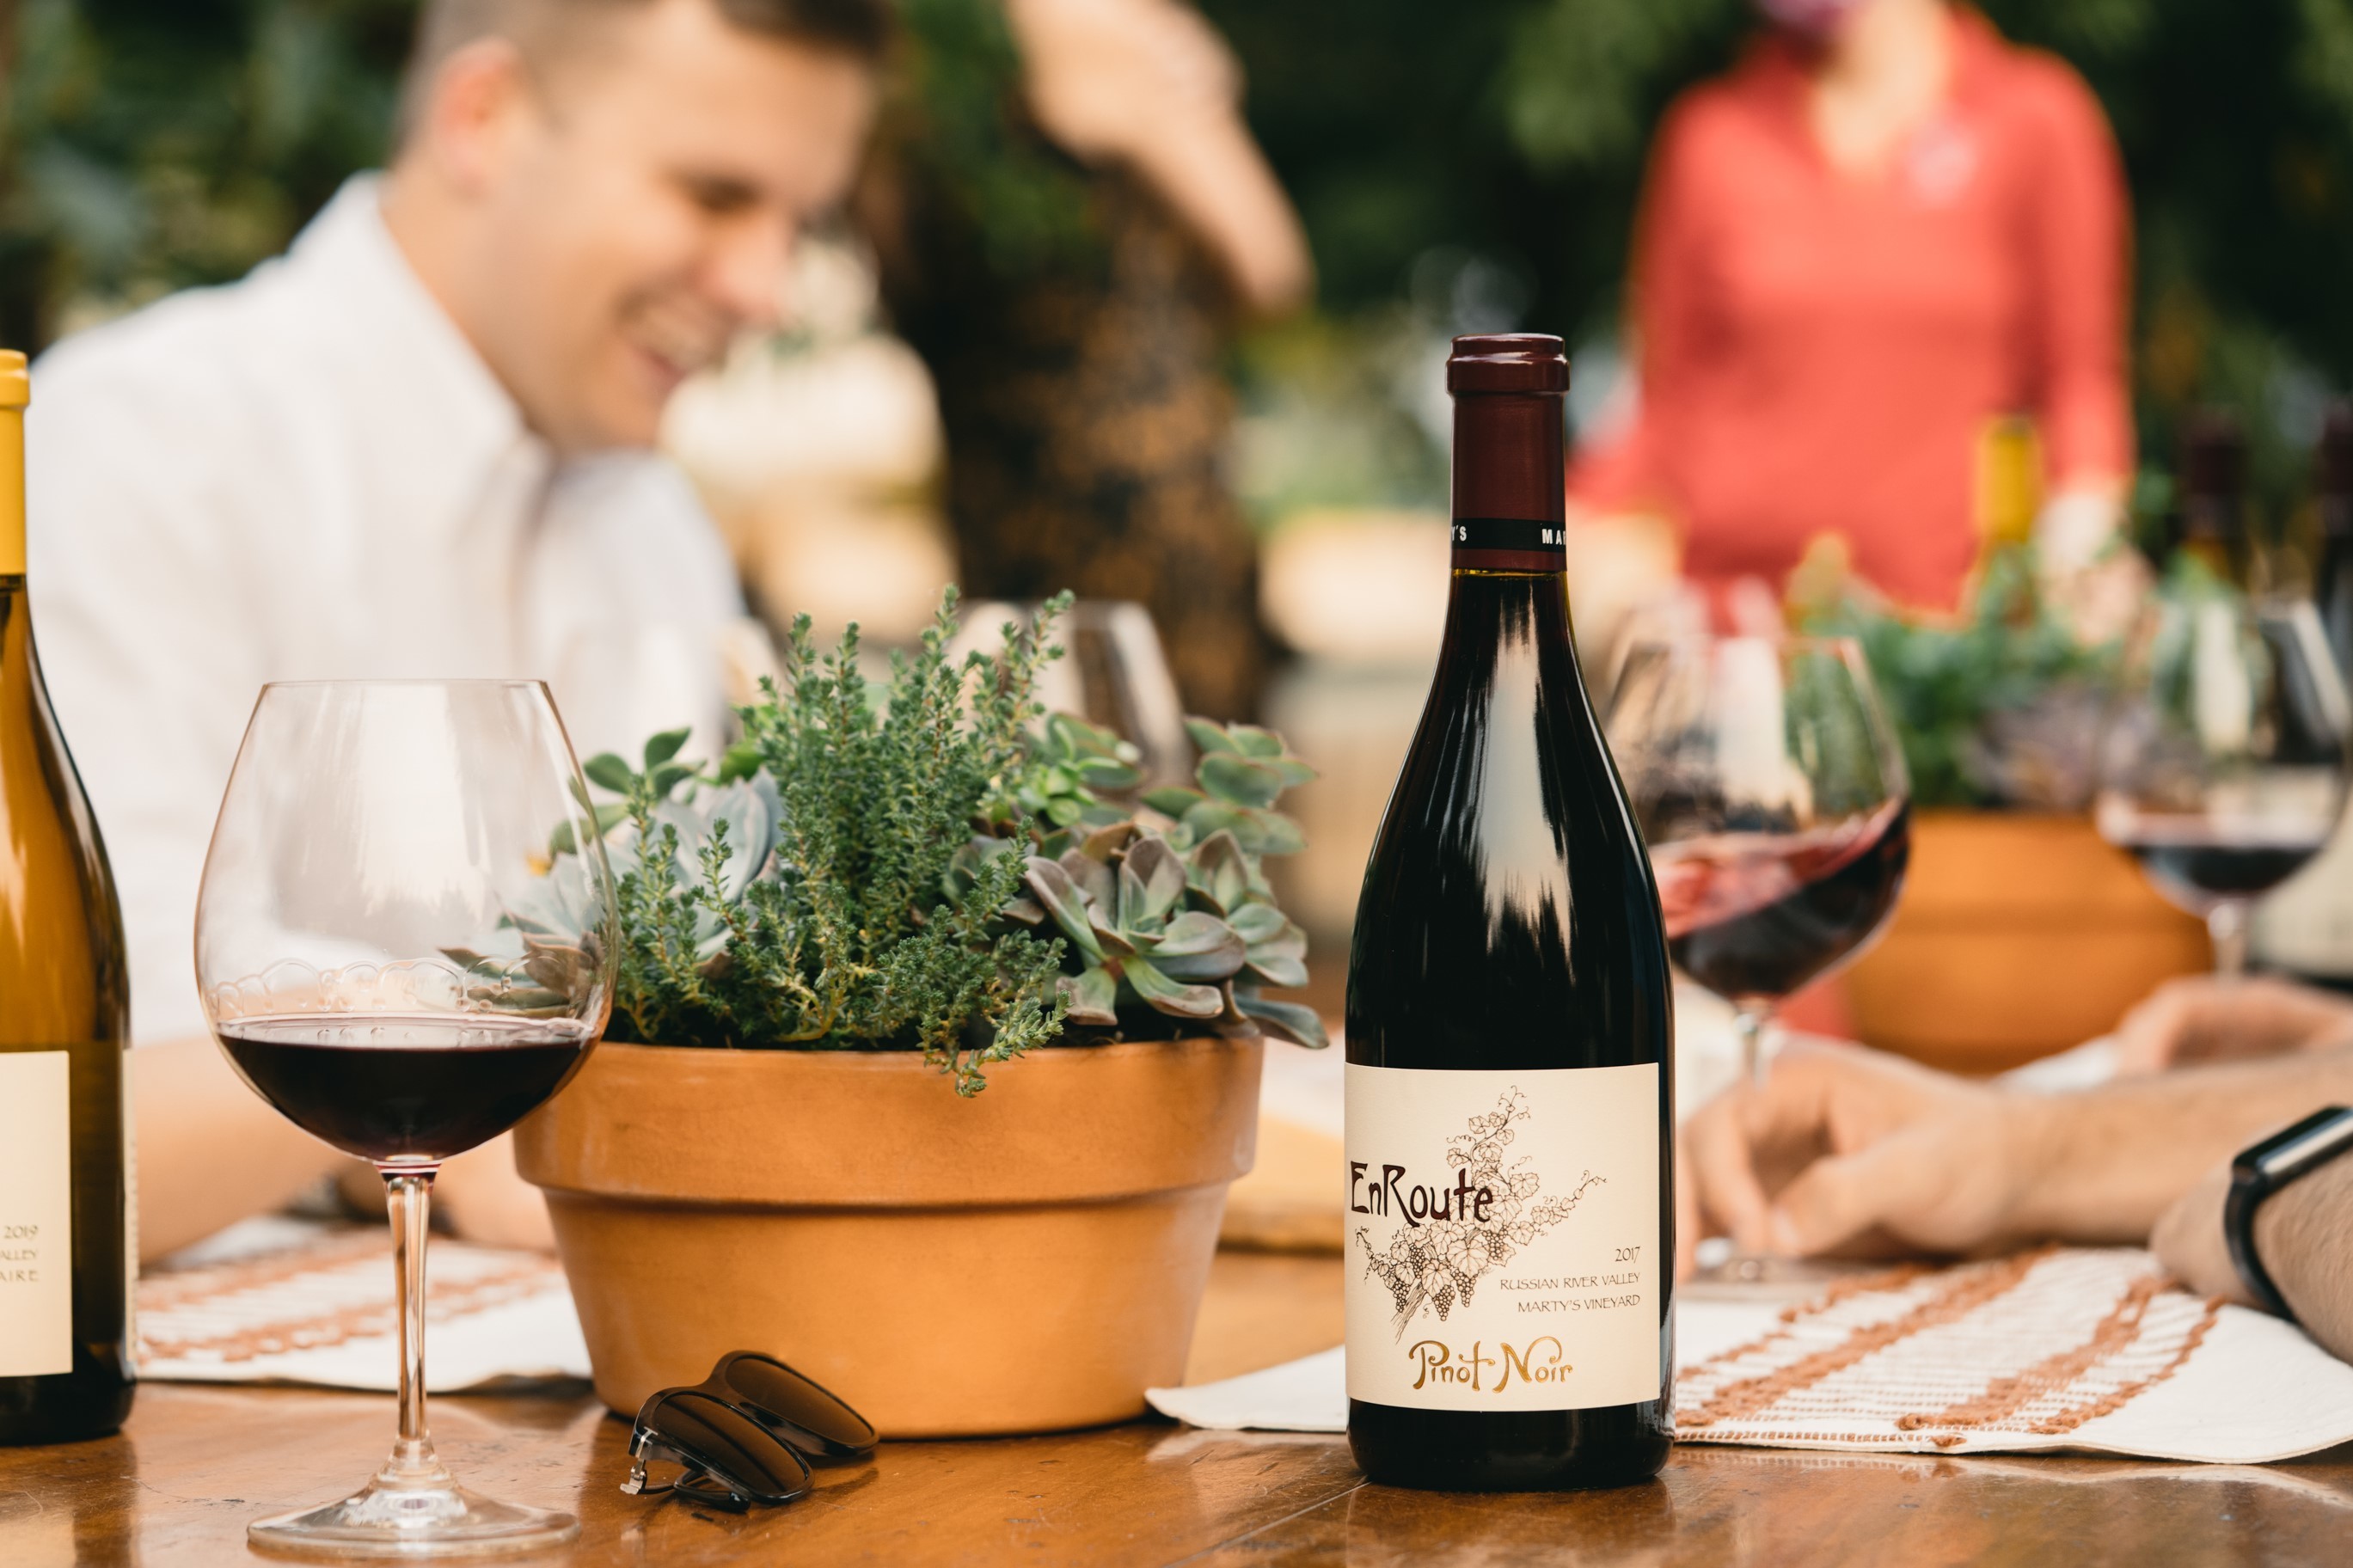 Autumn Pinot Noir Pairing: Where the Wild(ly Delicious) Things Are